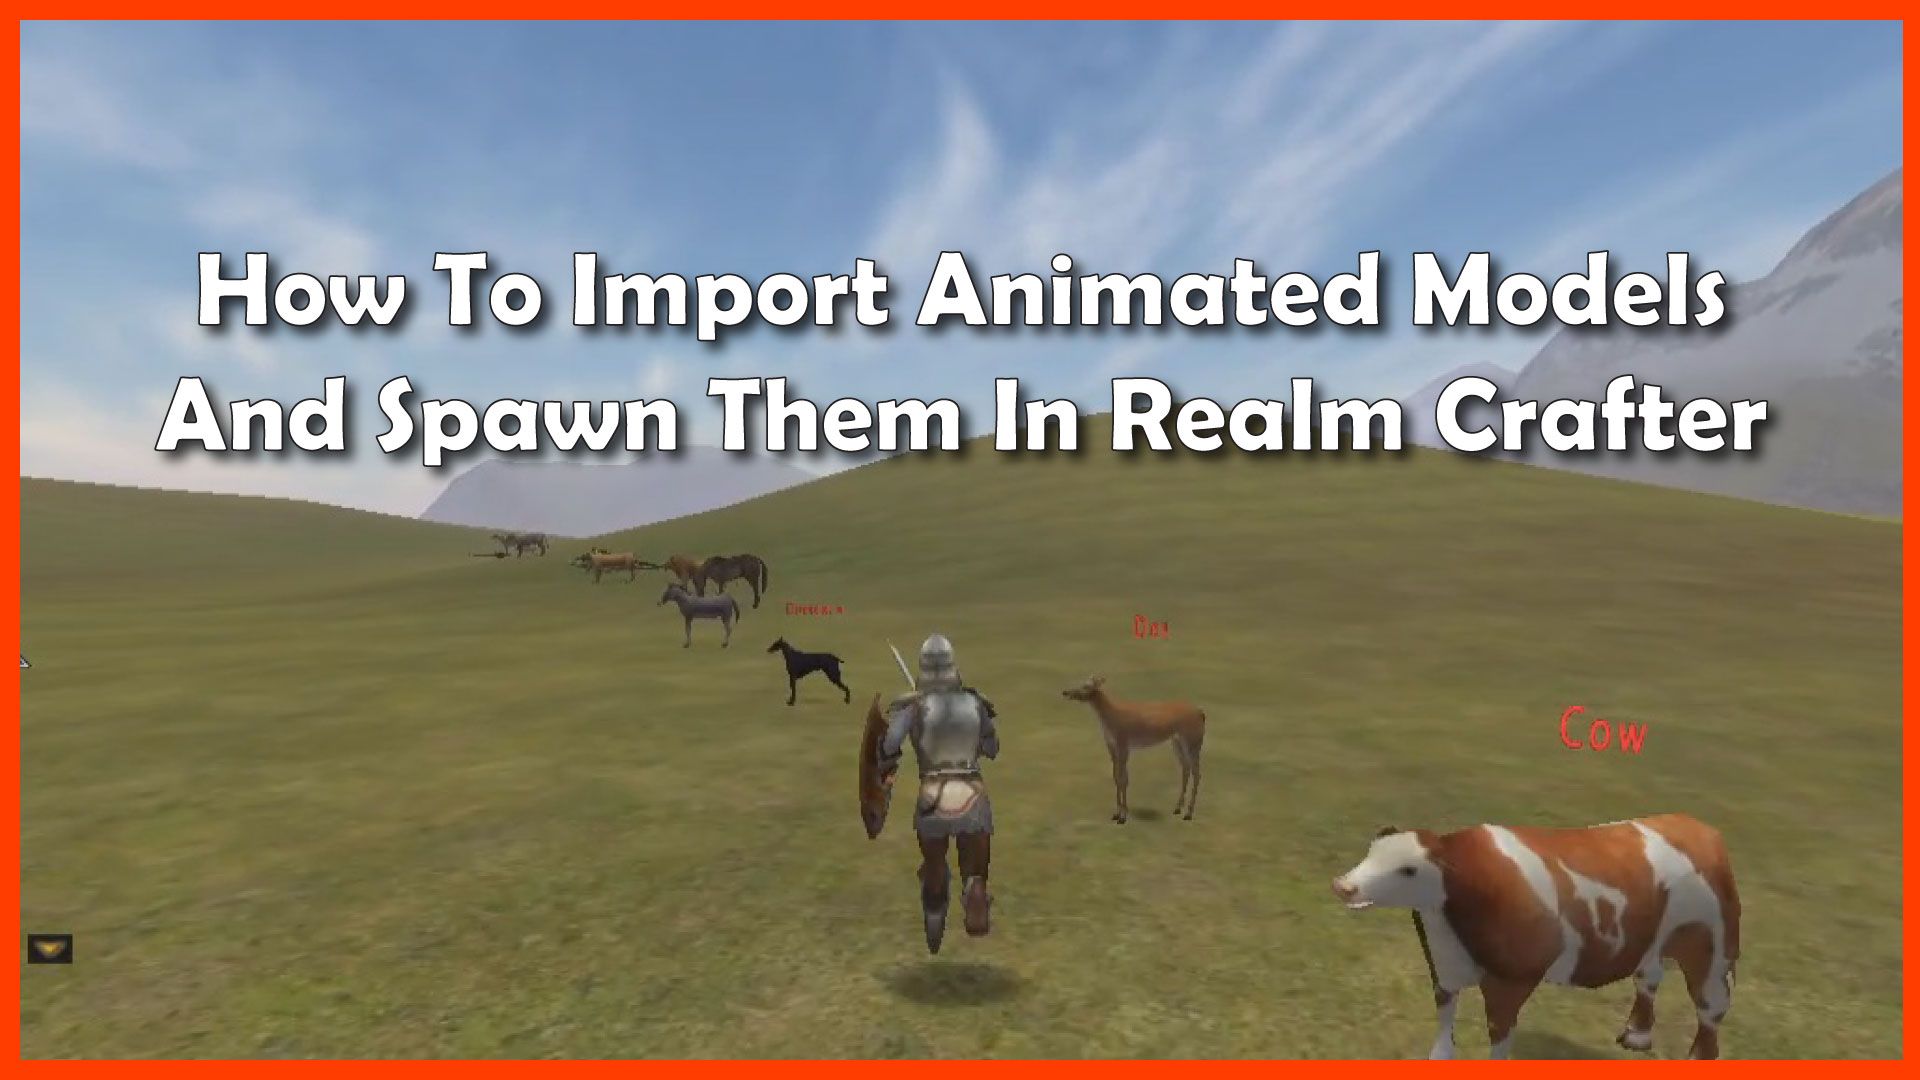 how to import animated models and spawn them in realm crafter title image